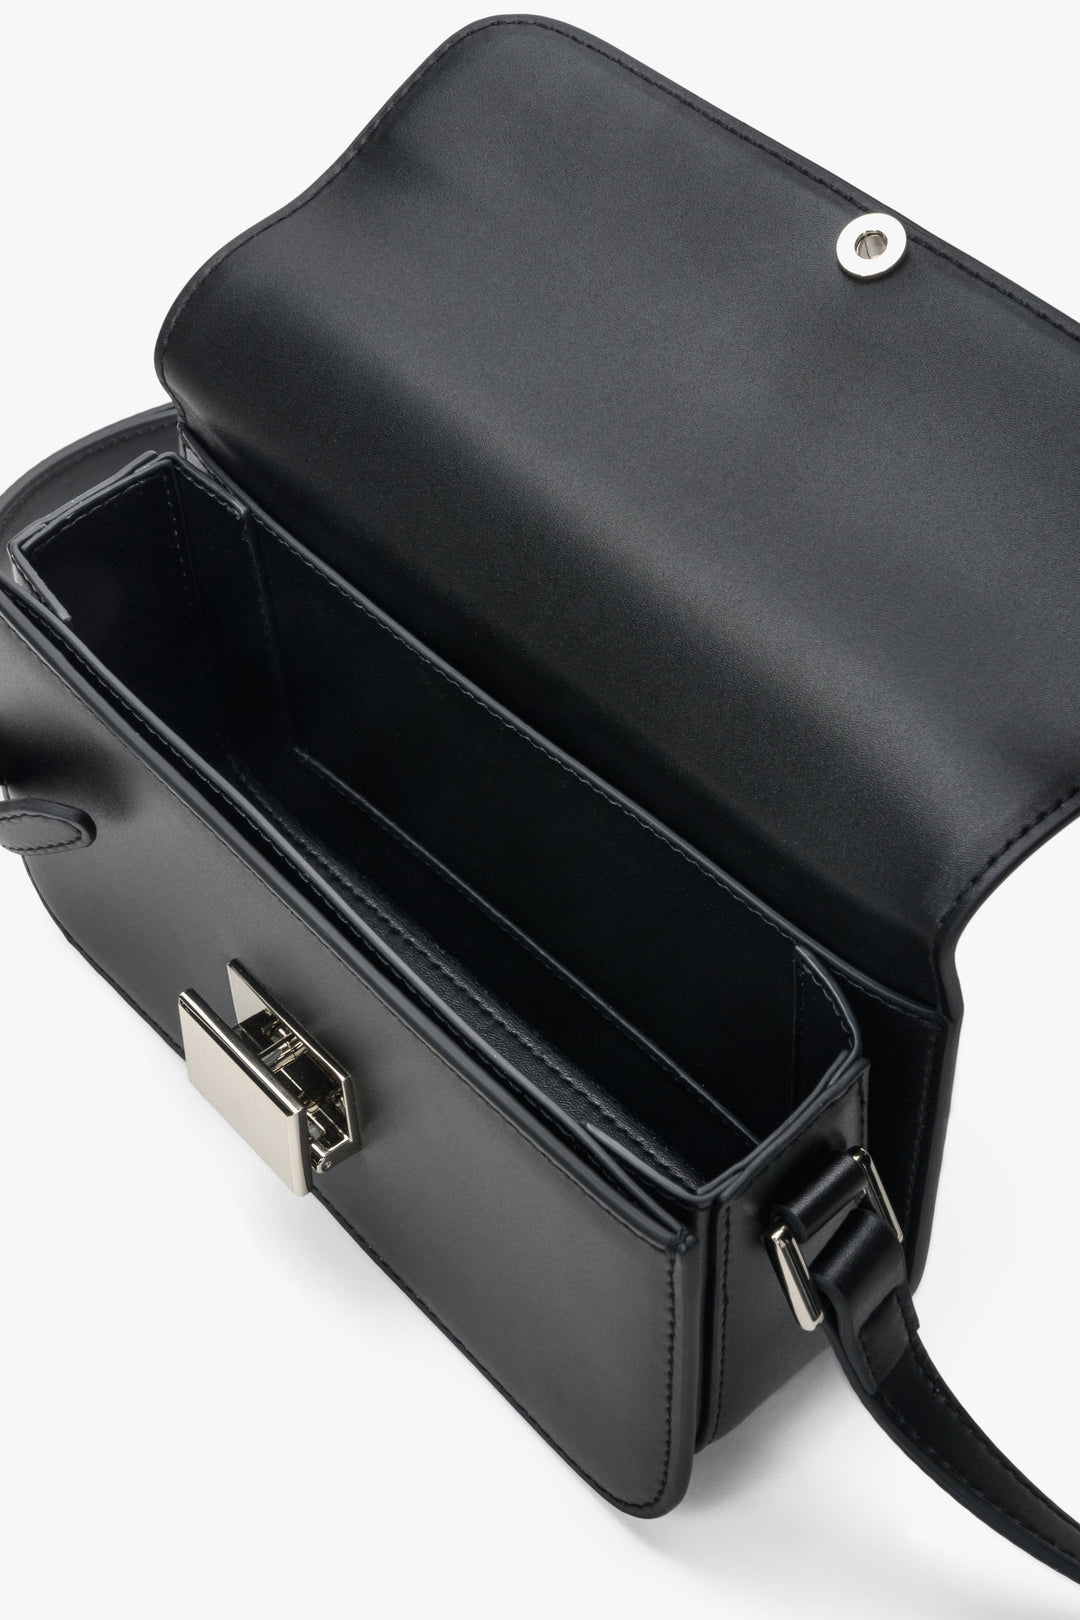 Leather, handy women's handbag Estro in black with silver fittings Estreo - close-up on the interior of the model.